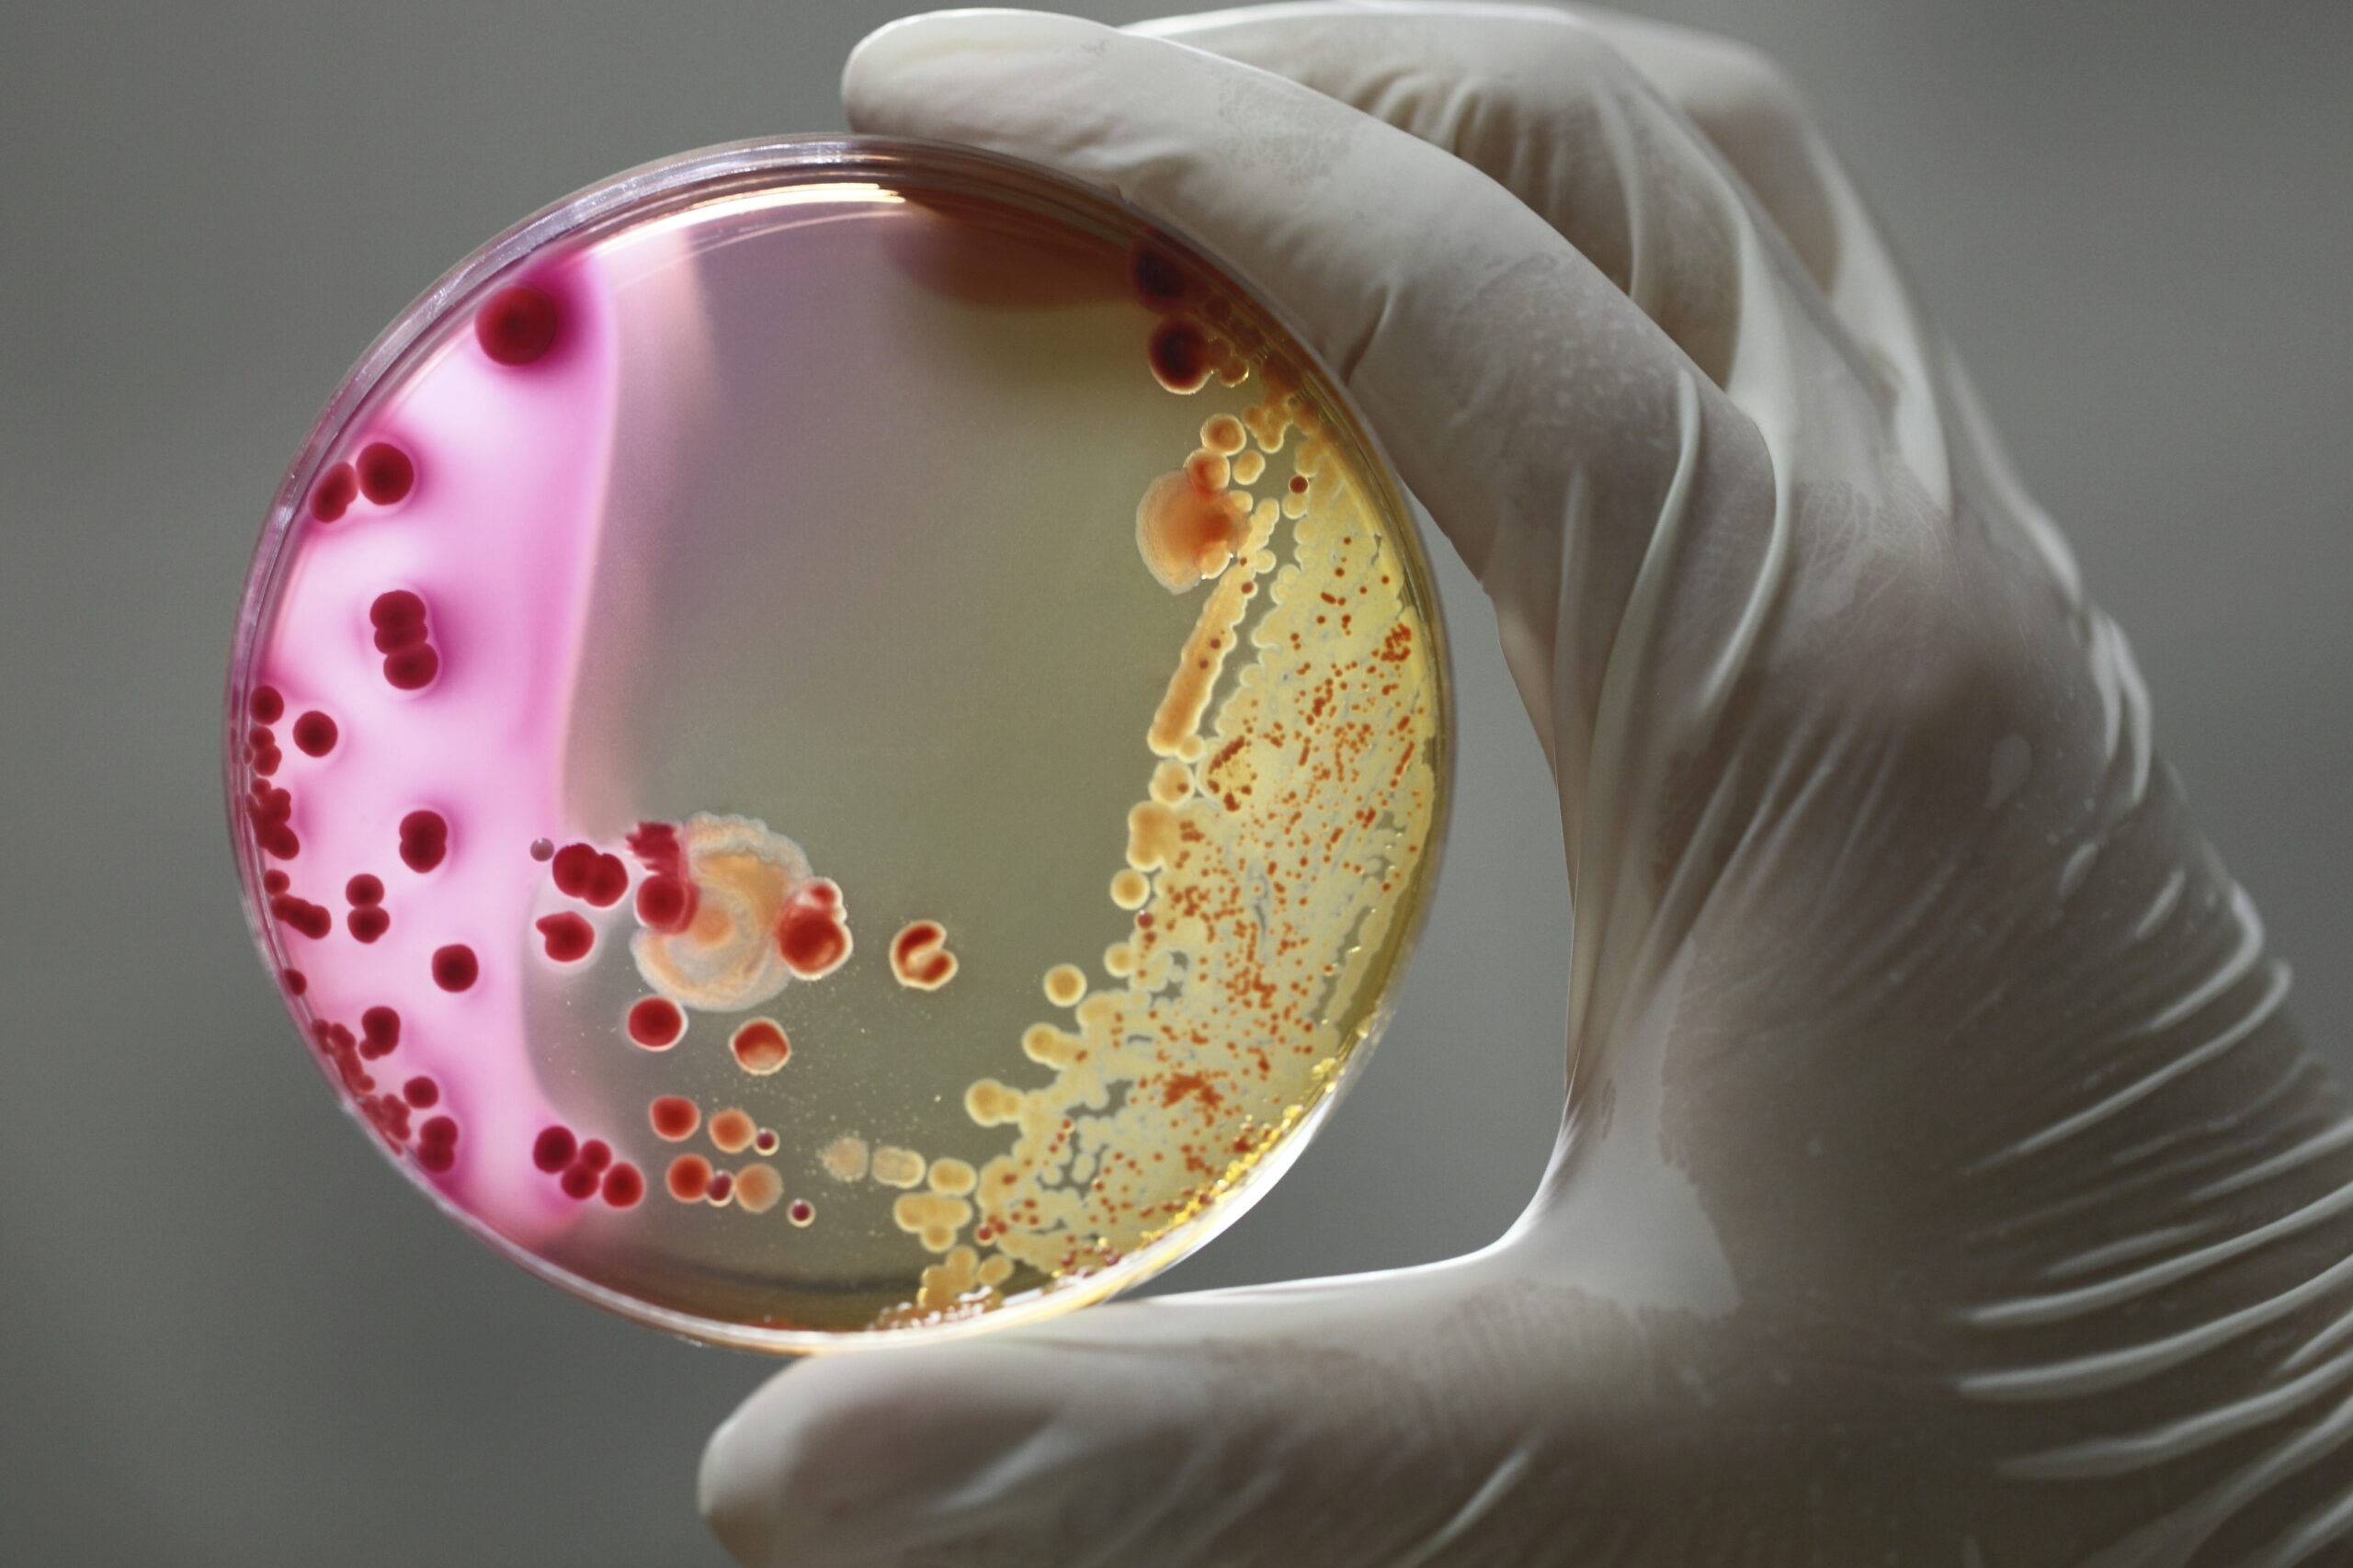 Skin Bacteria May Help To Protect Skin Against Cancer